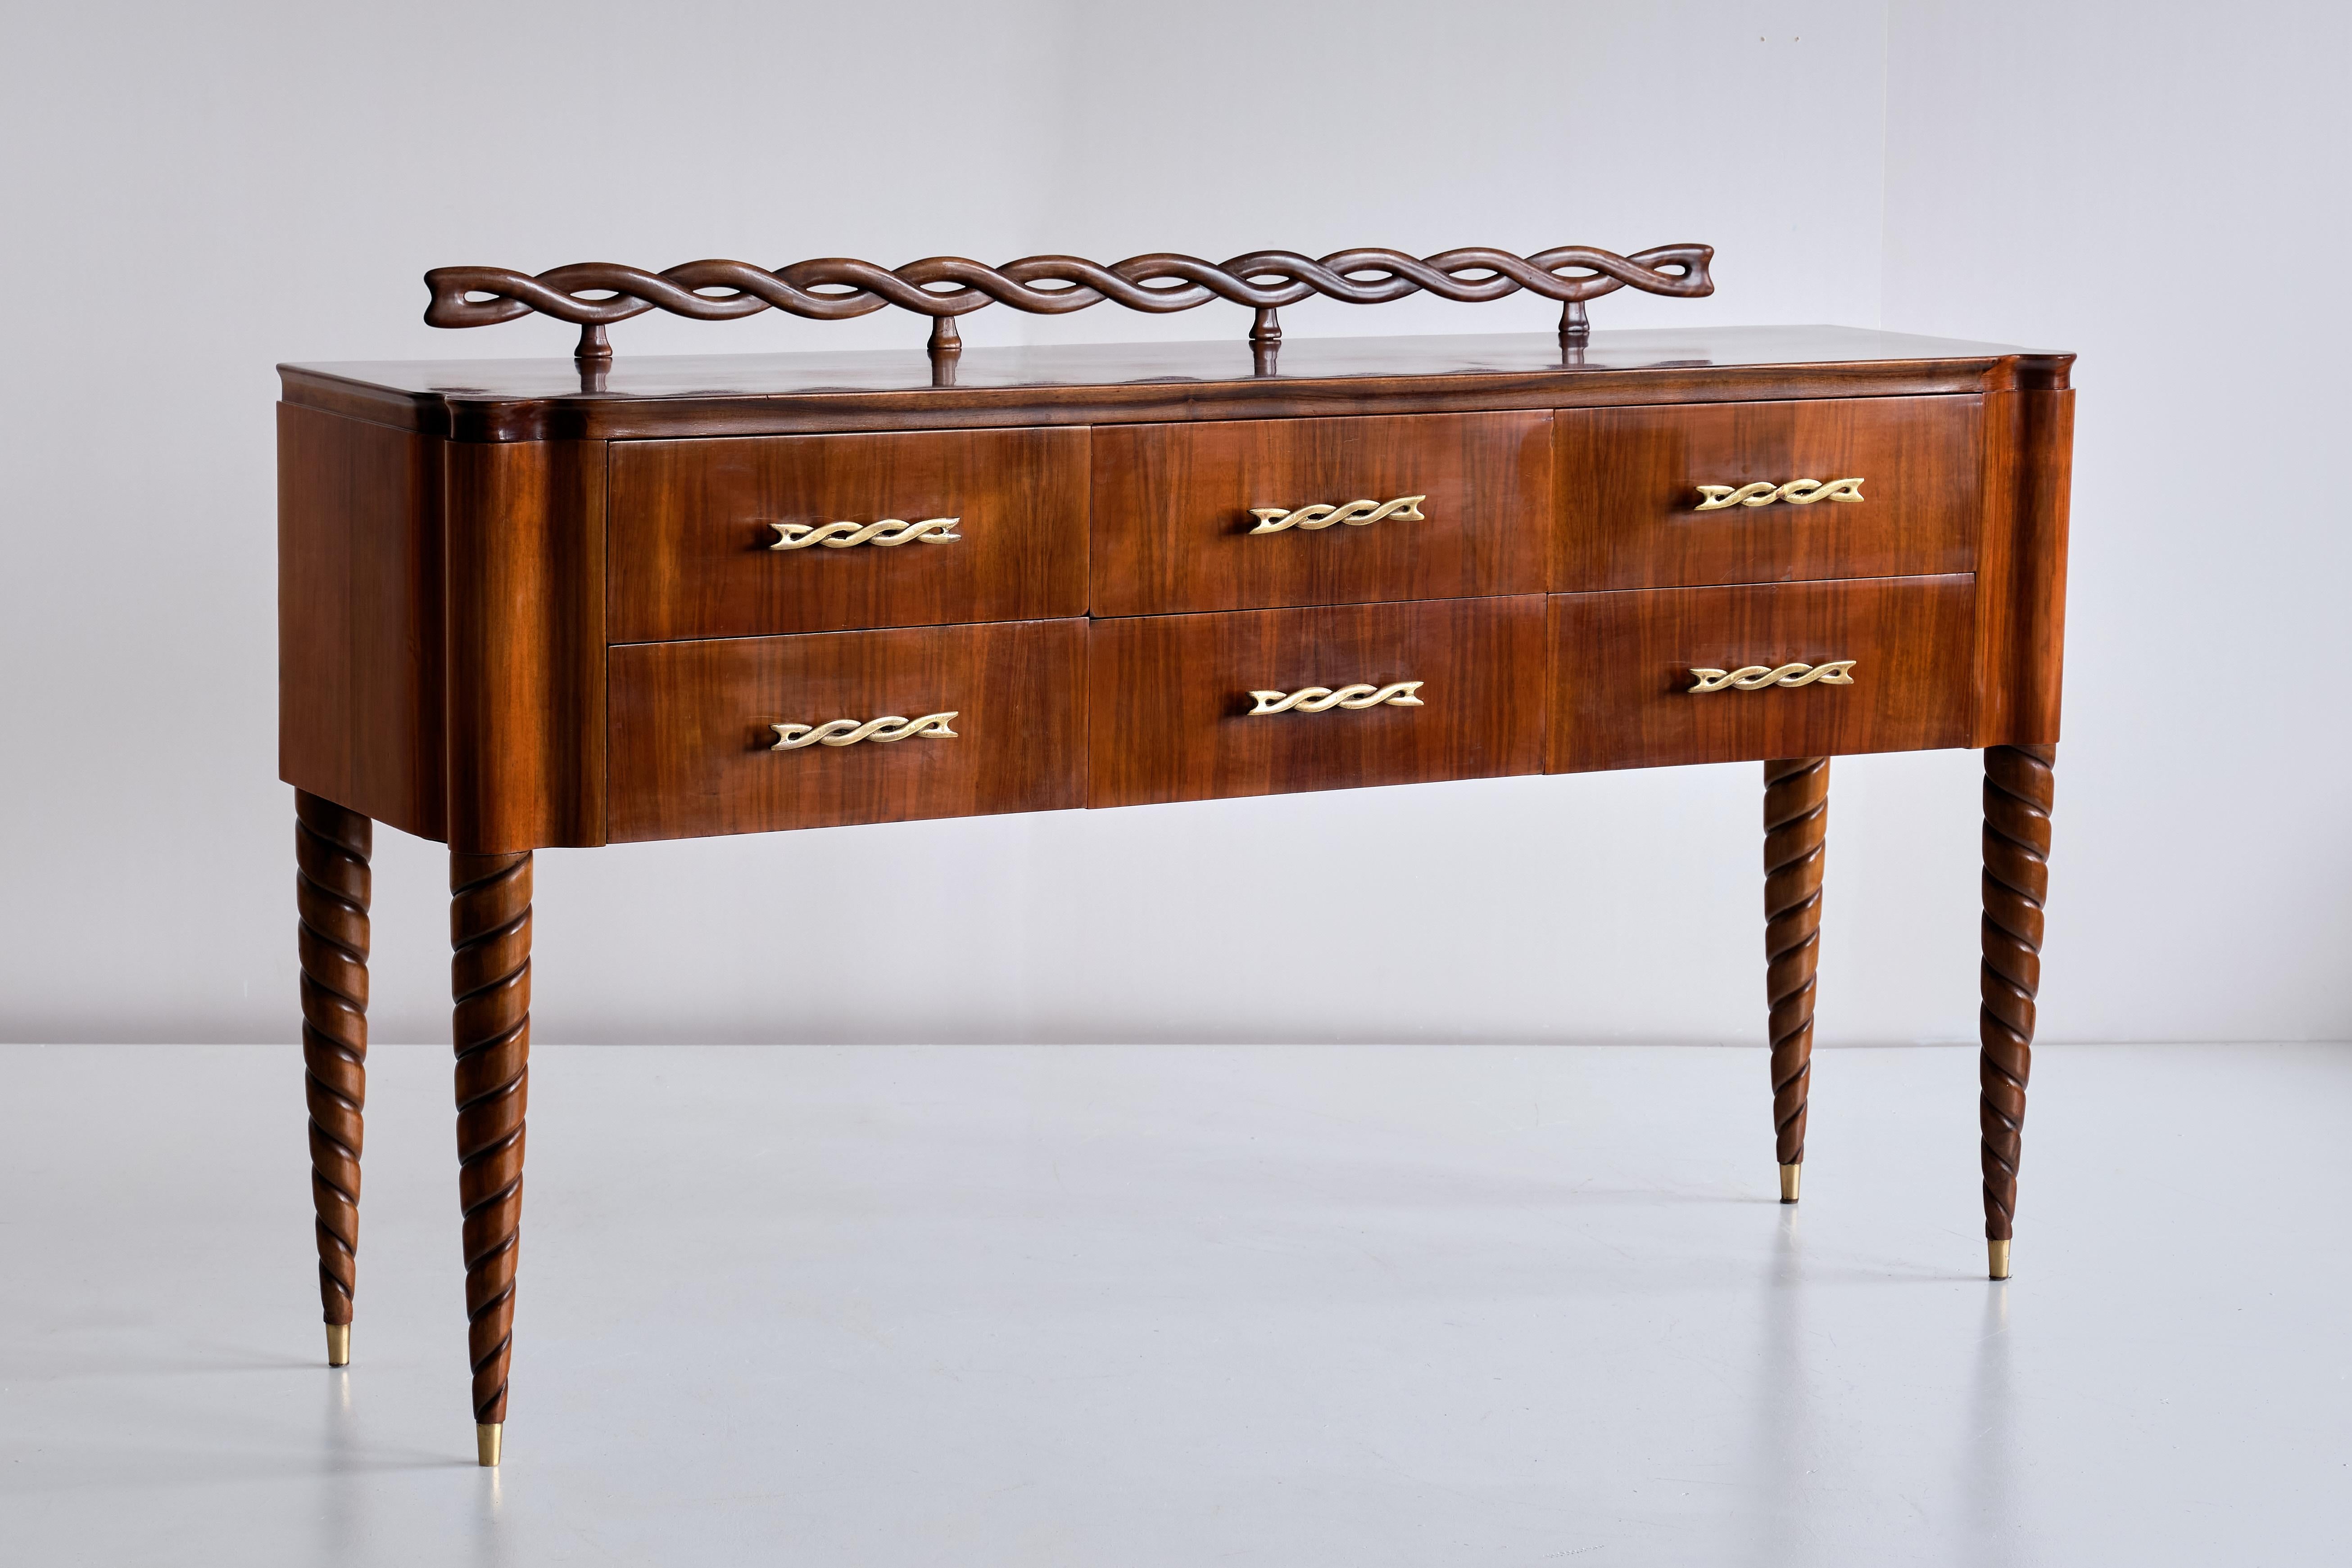 This exceptional counter-buffet / sideboard was designed by Paolo Buffa and produced by Mario Quarti in Milan, Italy, circa 1942. The sideboard stands on four grooved, turned twist legs in solid walnut with brass tips. Molded and edged top in